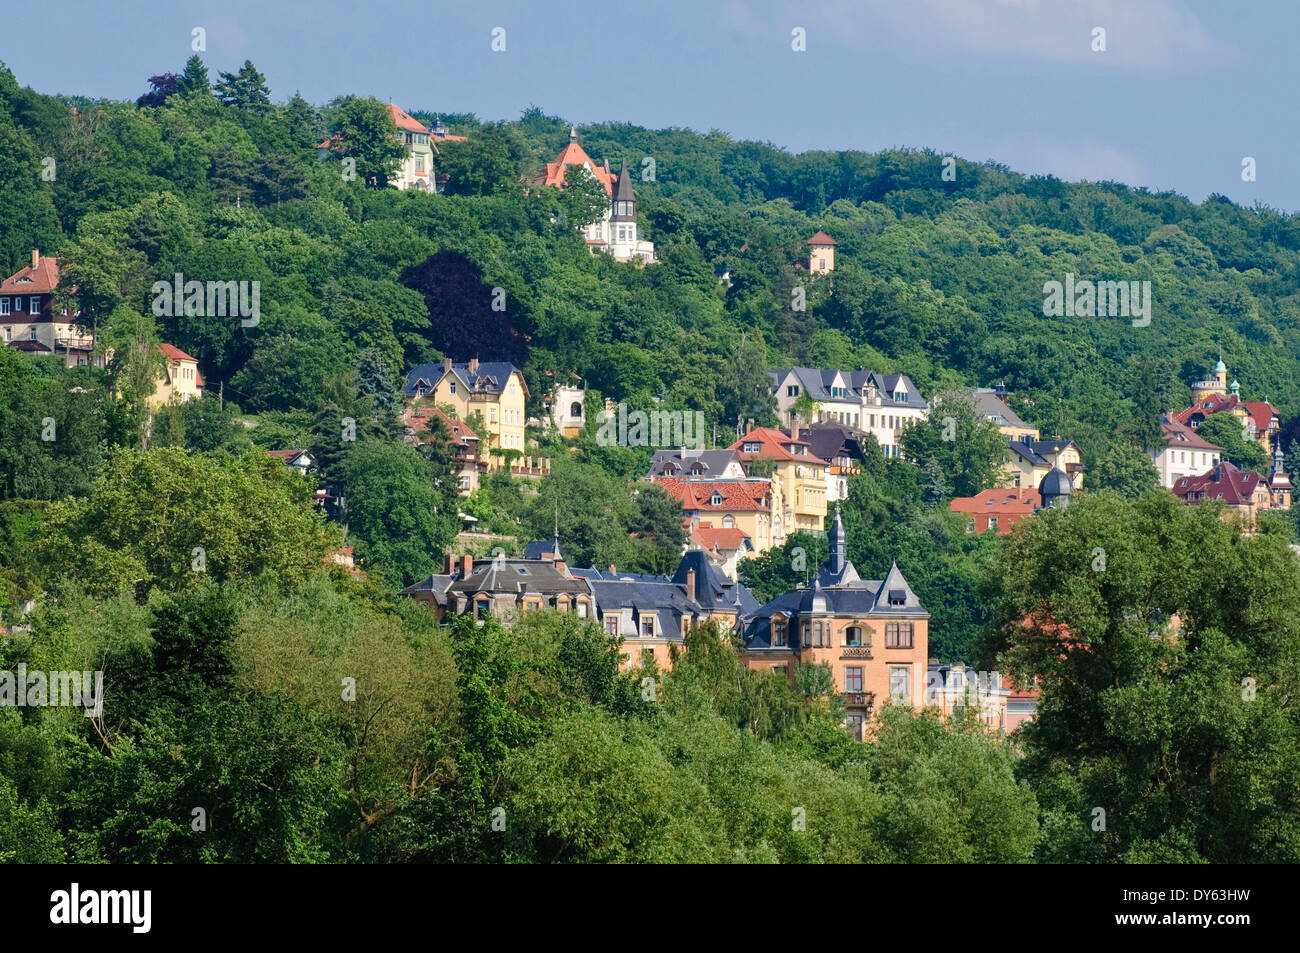 Villas on a hill at Loschwitz district, Dresden, Saxony, Germany, Europe Stock Photo